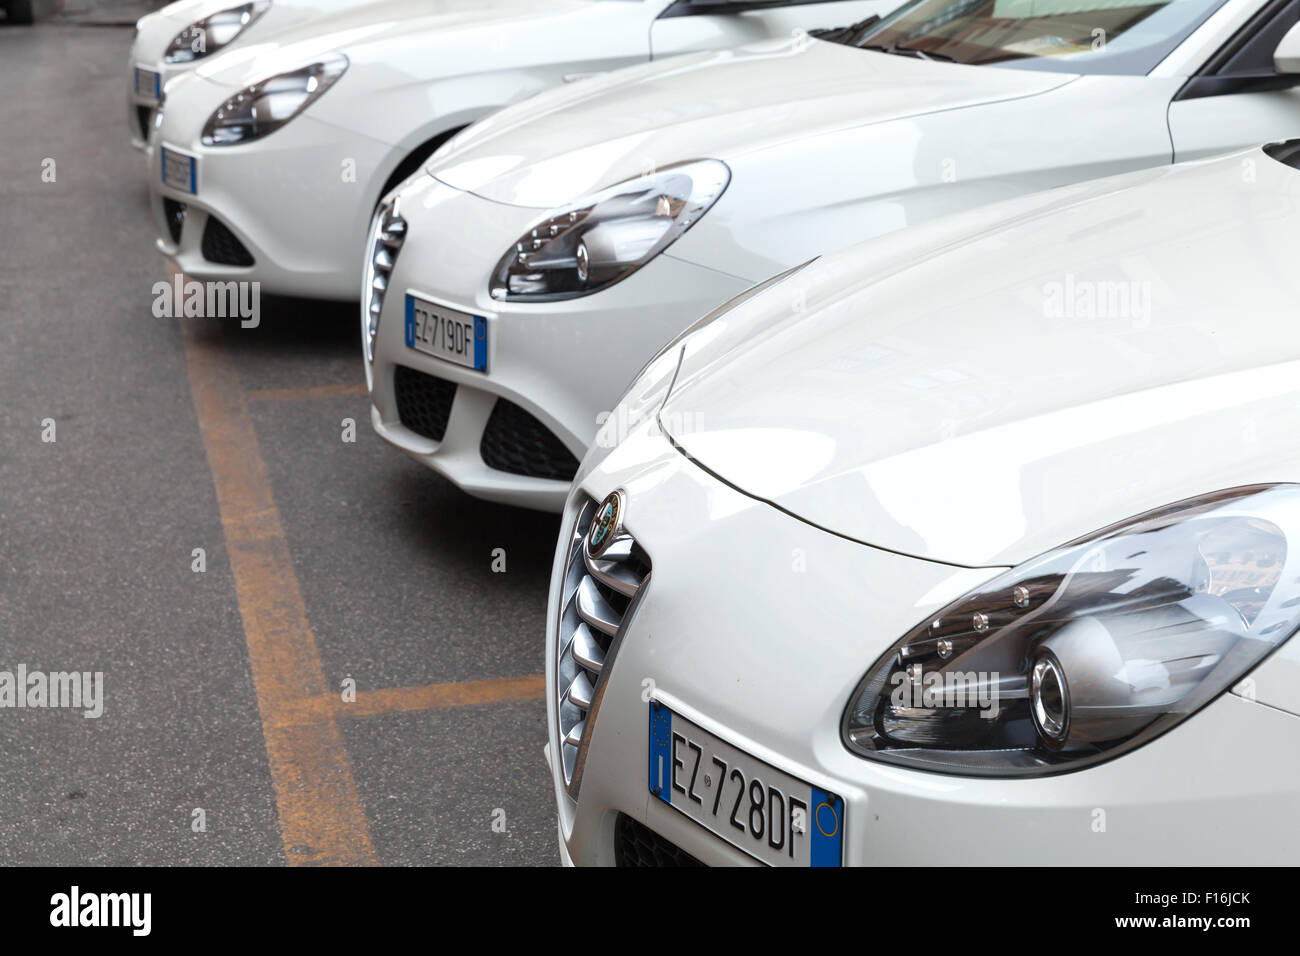 Rome, Italy - August 7, 2015: White Alfa Romeo Giulietta Type 940 cars stands parked in a row Stock Photo